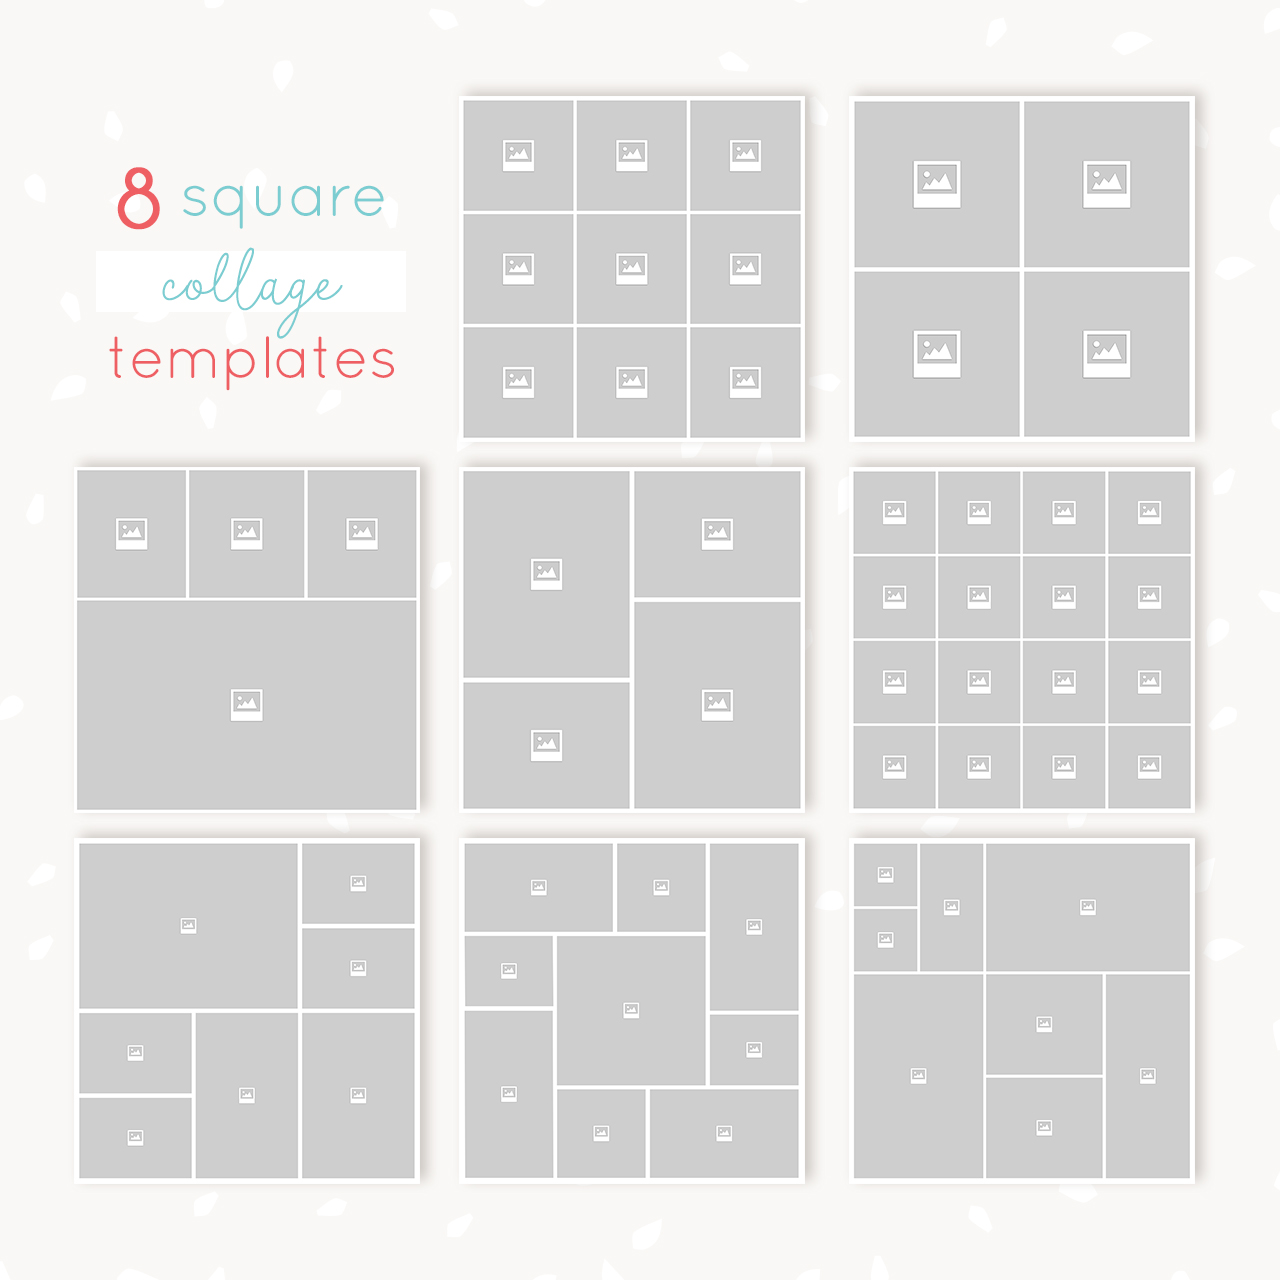 Square collages bundle for Photoshop